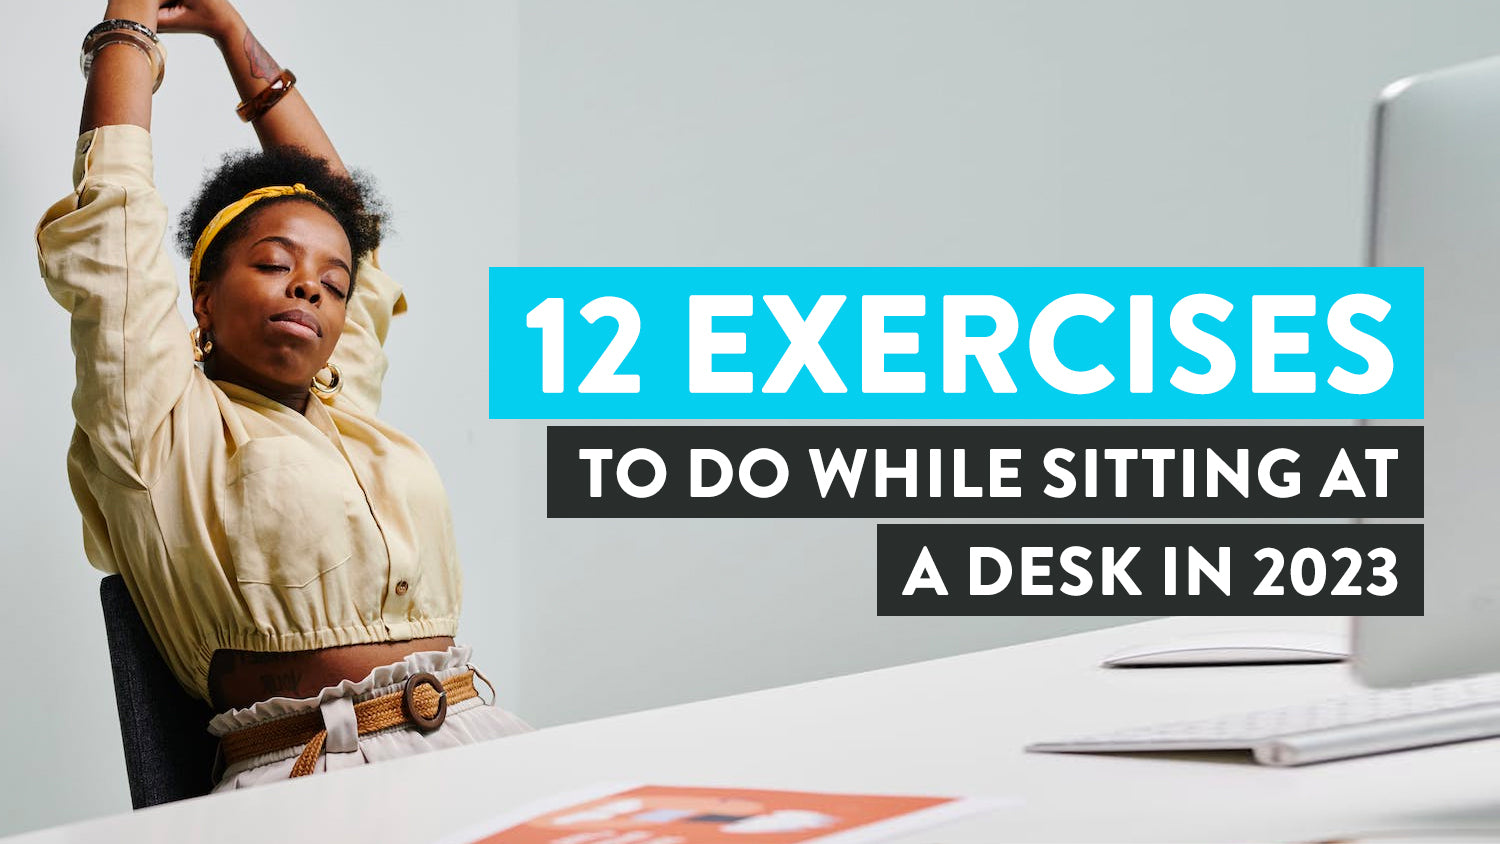 http://desky.com.au/cdn/shop/articles/12-Exercises-to-do-while-sitting-at-a-desk-in-2023.jpg?v=1689765085